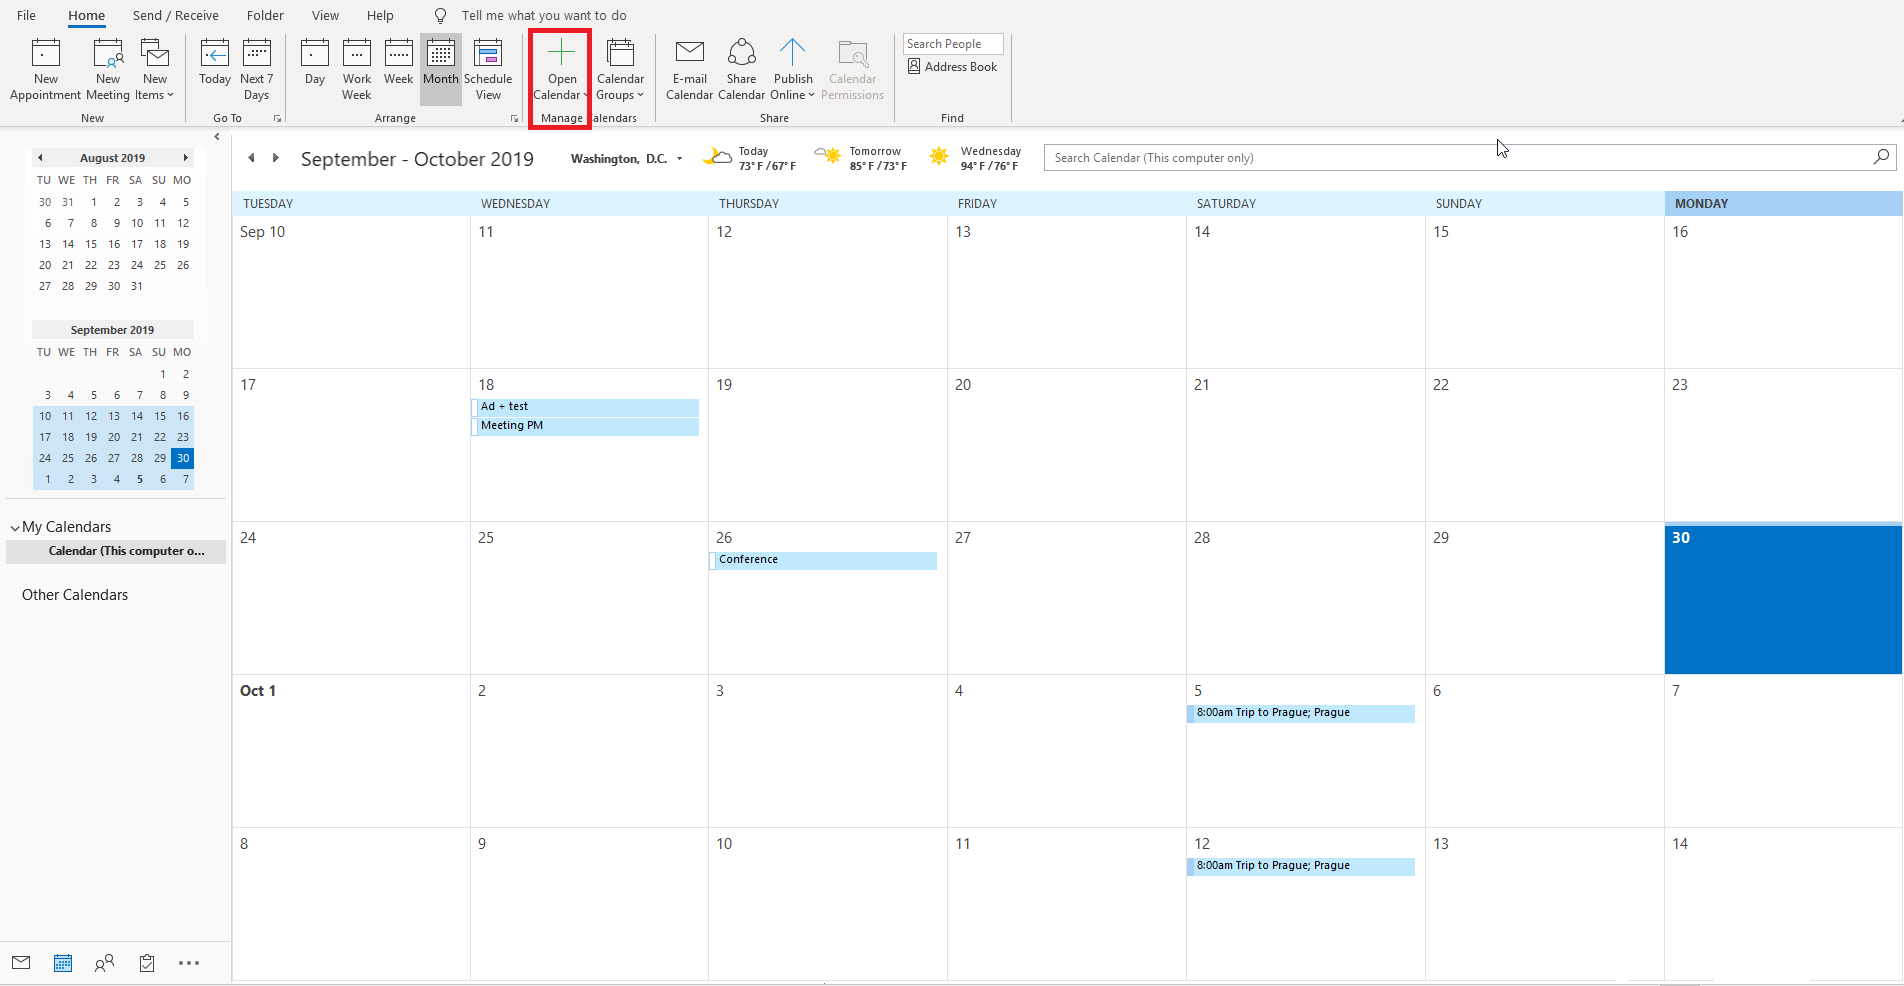 view calendars side by side in outlook 2016 for mac